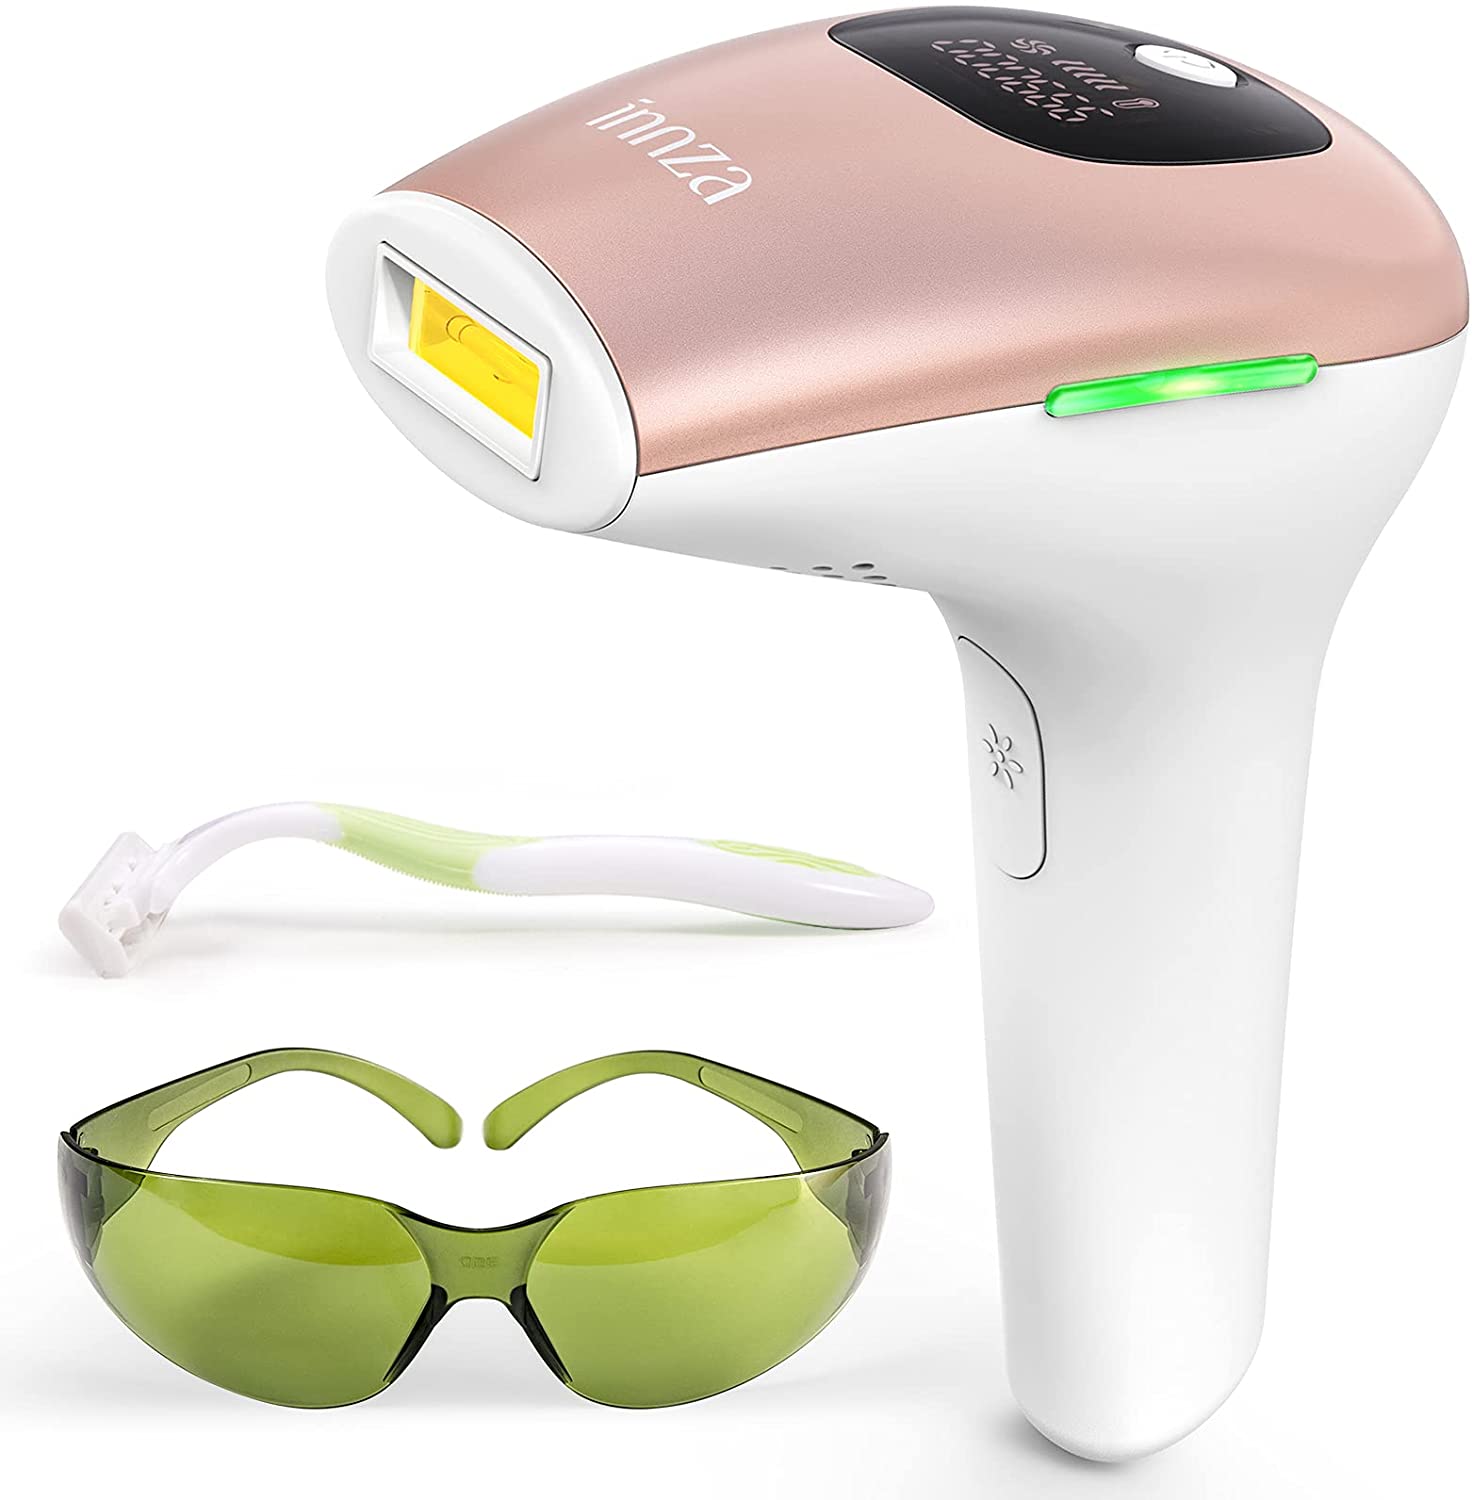 Innza IPL Permanent Painless Hair Removal Lease System | Best Flawless  Razor & Flawless Shaver for Women's Hair Remover Price in Pakistan